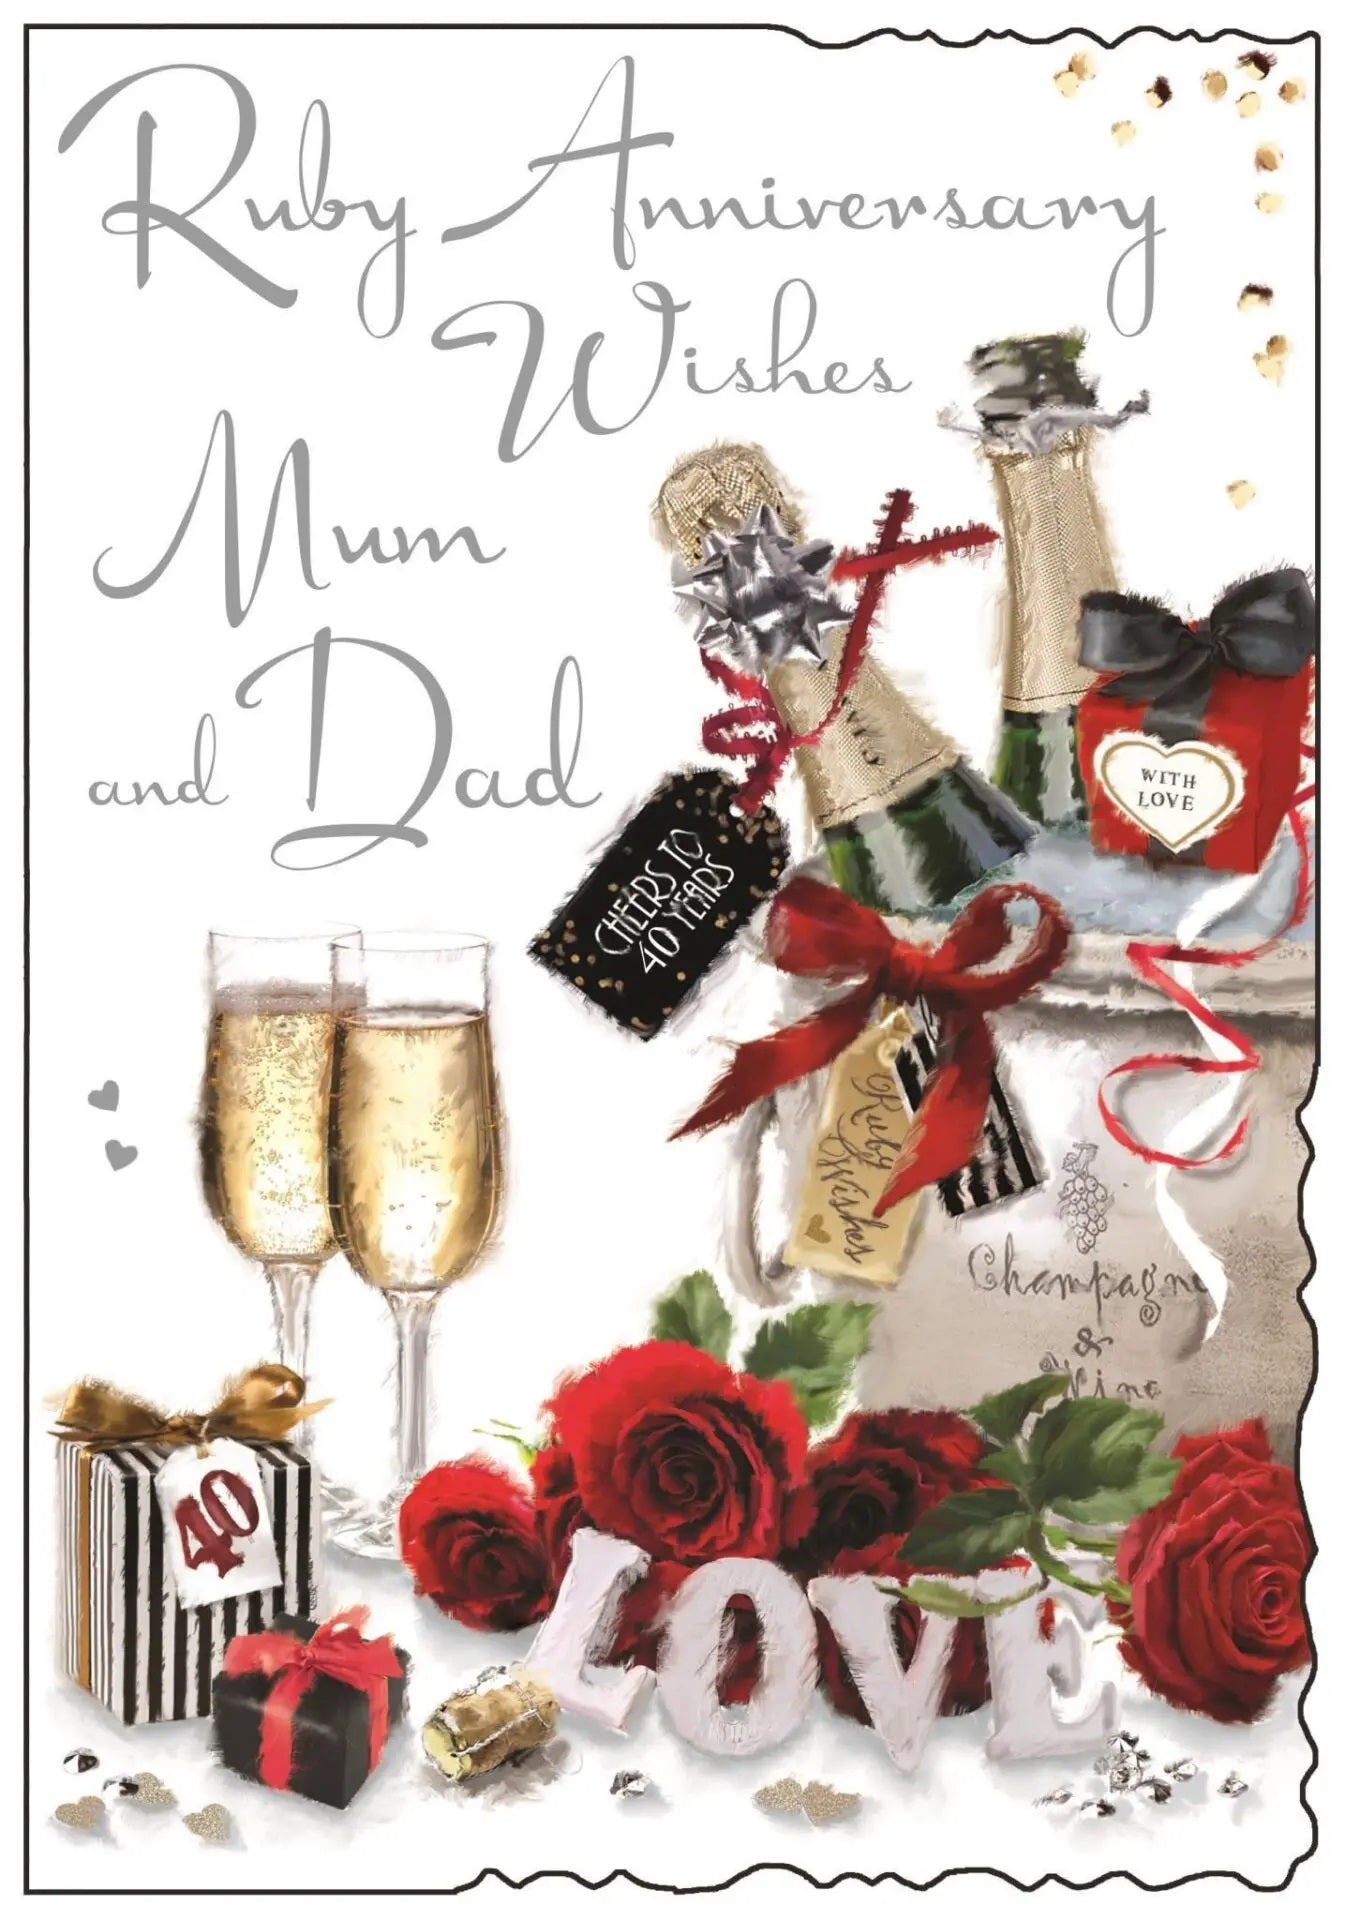 Mum and Dad 40th Wedding Anniversary Card - Champagne and Roses